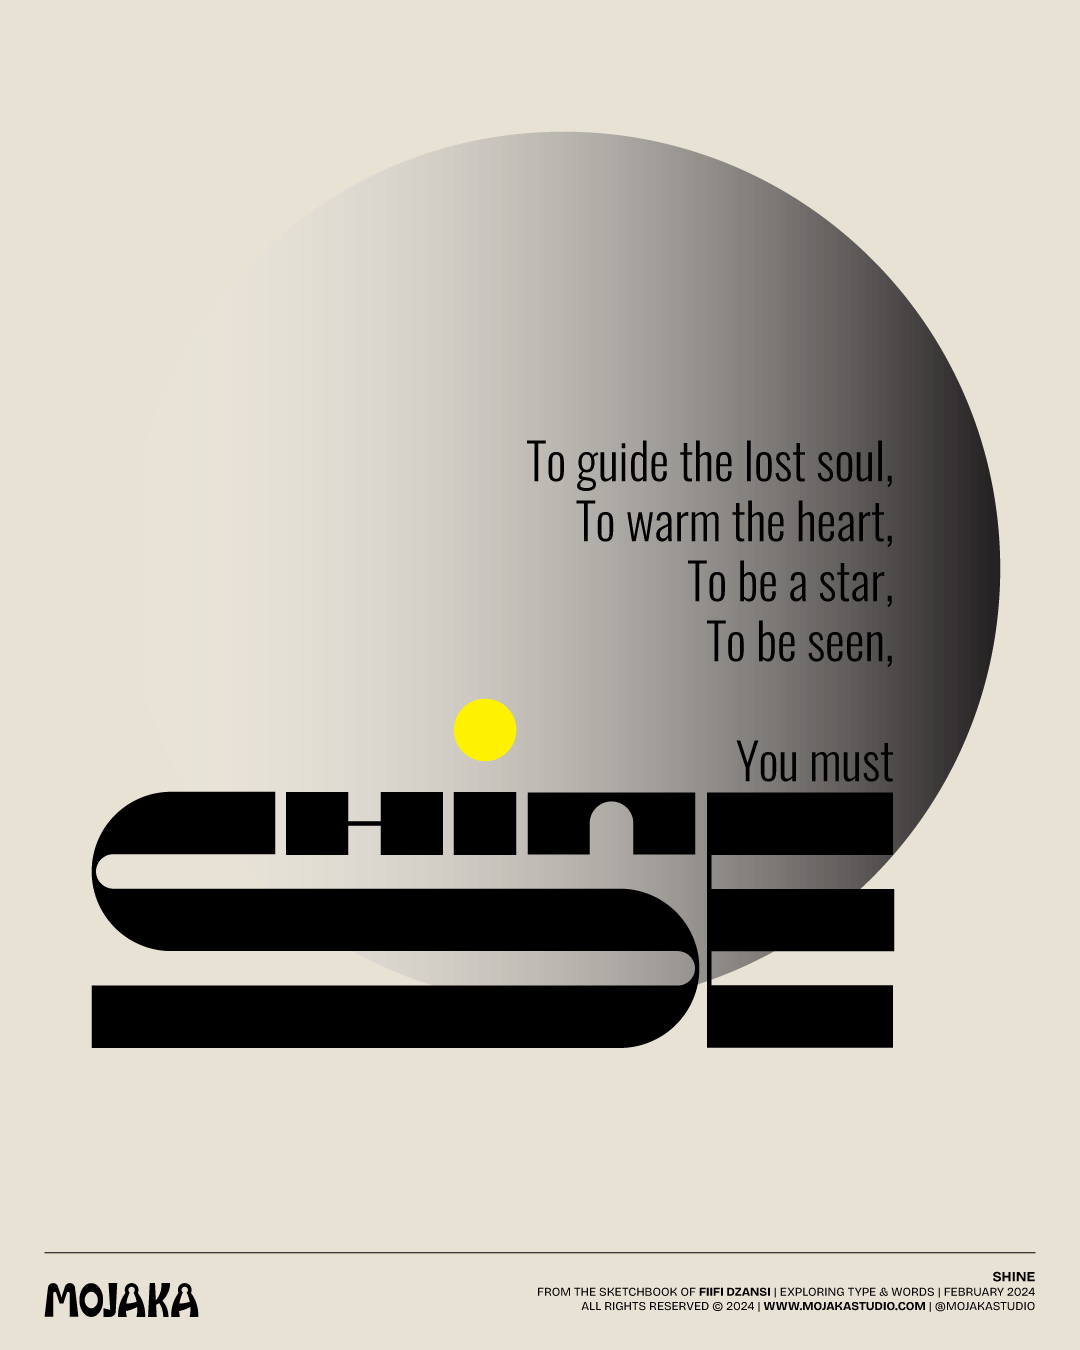 Type design of SHINE in monochrome with the sun at the background